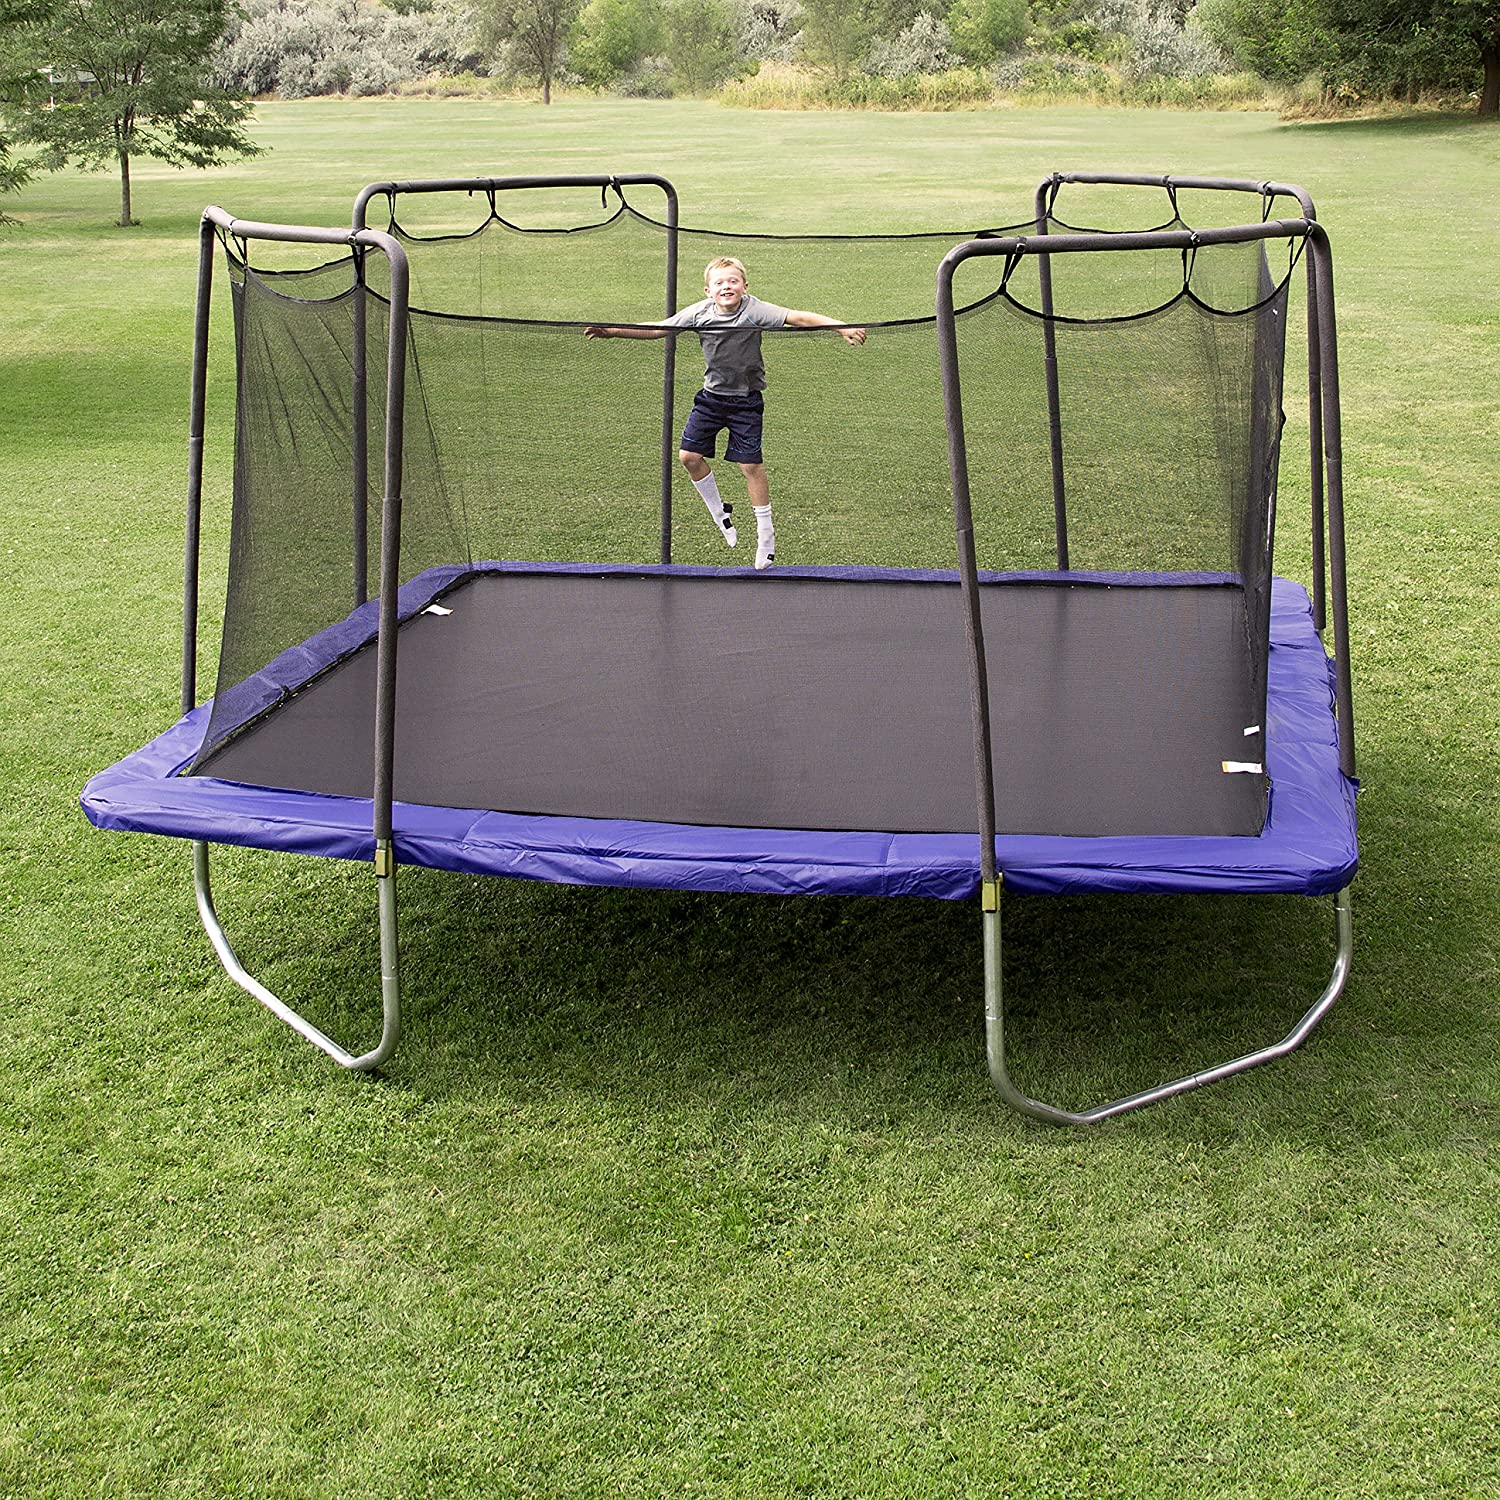 15-Foot Square Trampoline with Enclosure Net Review